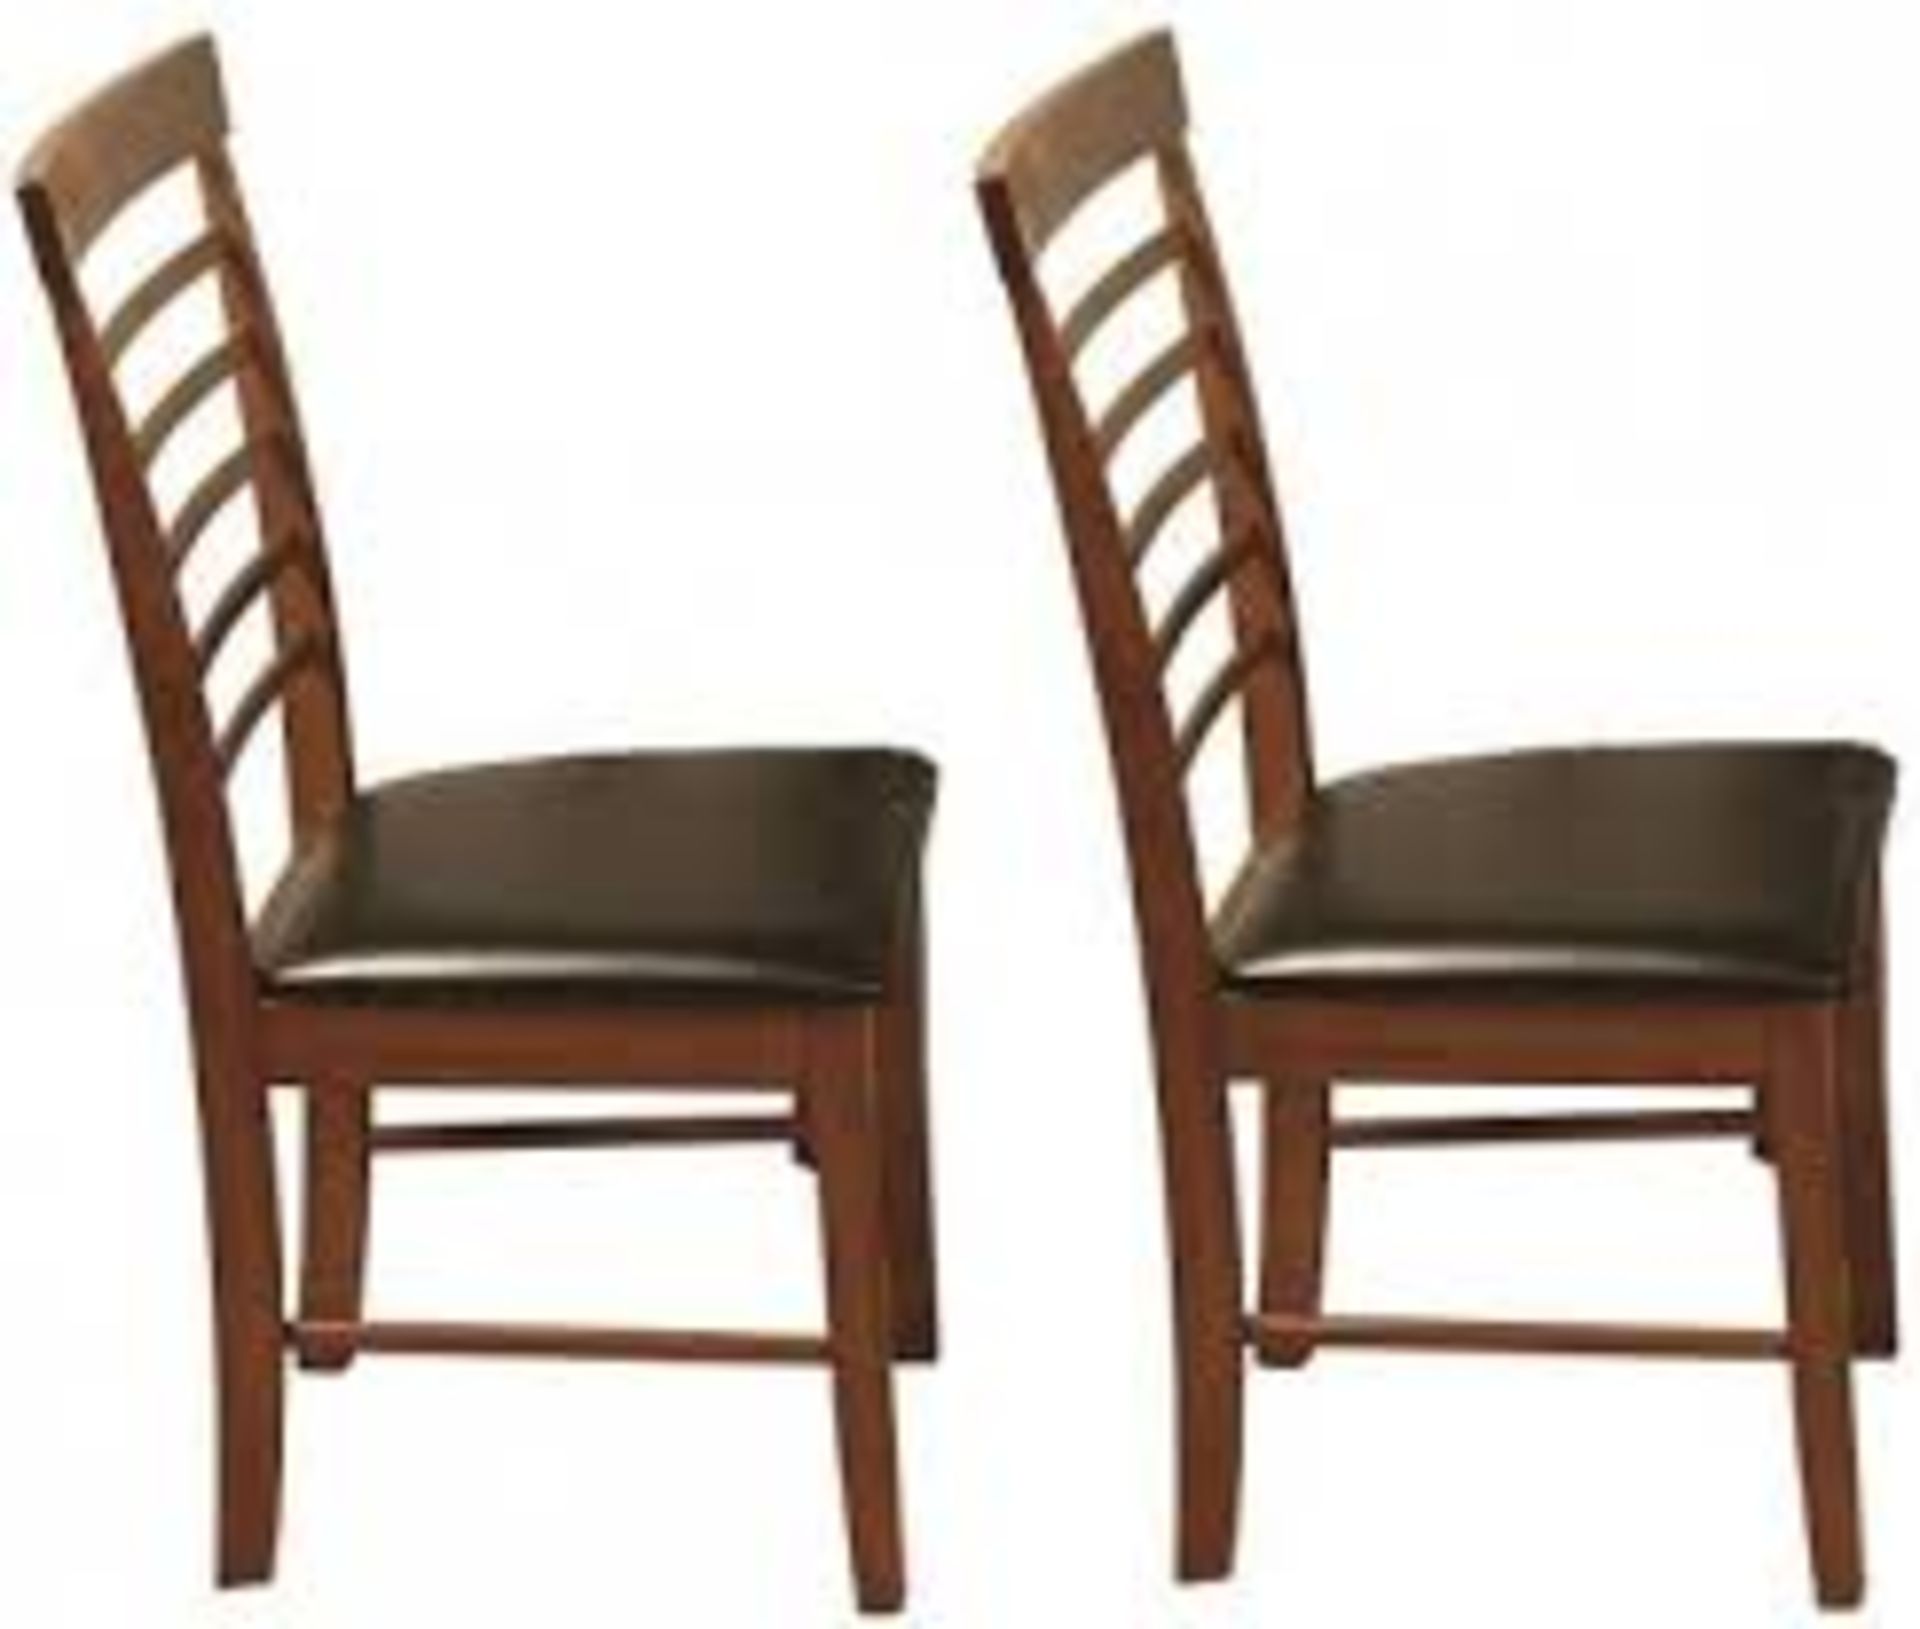 Boxed Belfast Dark Oak Pack Of 2 Hanover Designer Dining Chairs RRP £80 (Public Viewing and